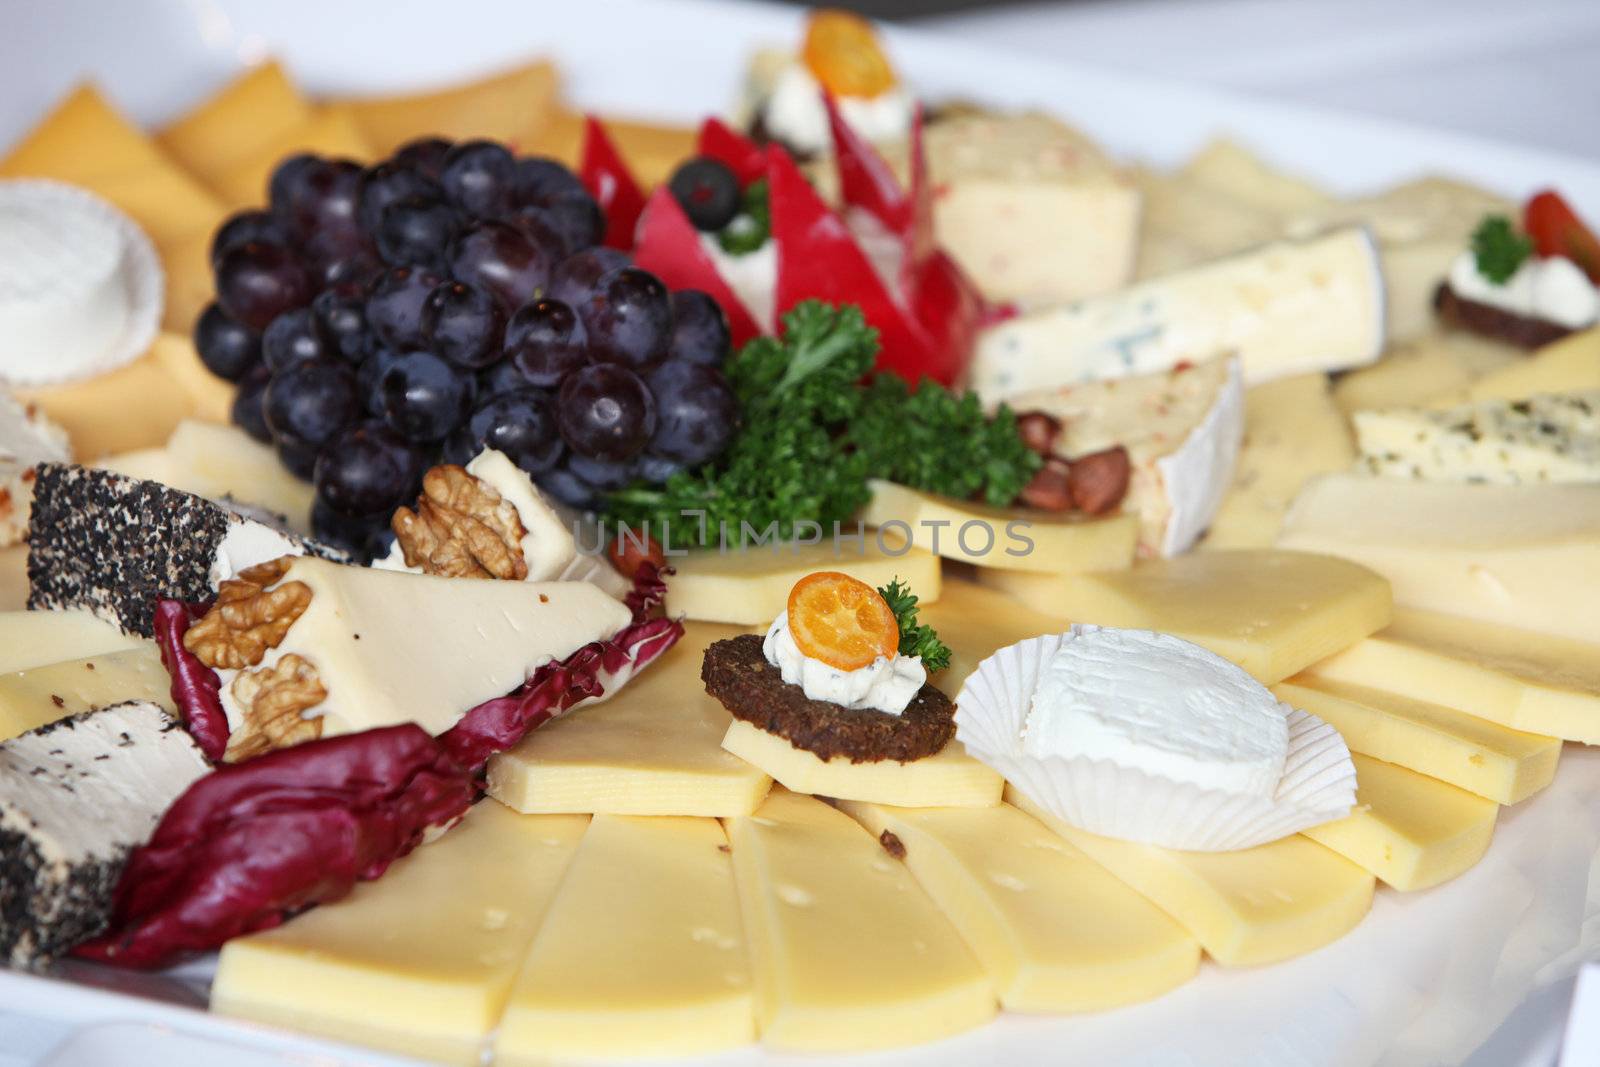 Cheese platter with a large array of different hard and soft cheeses on display on a buffet